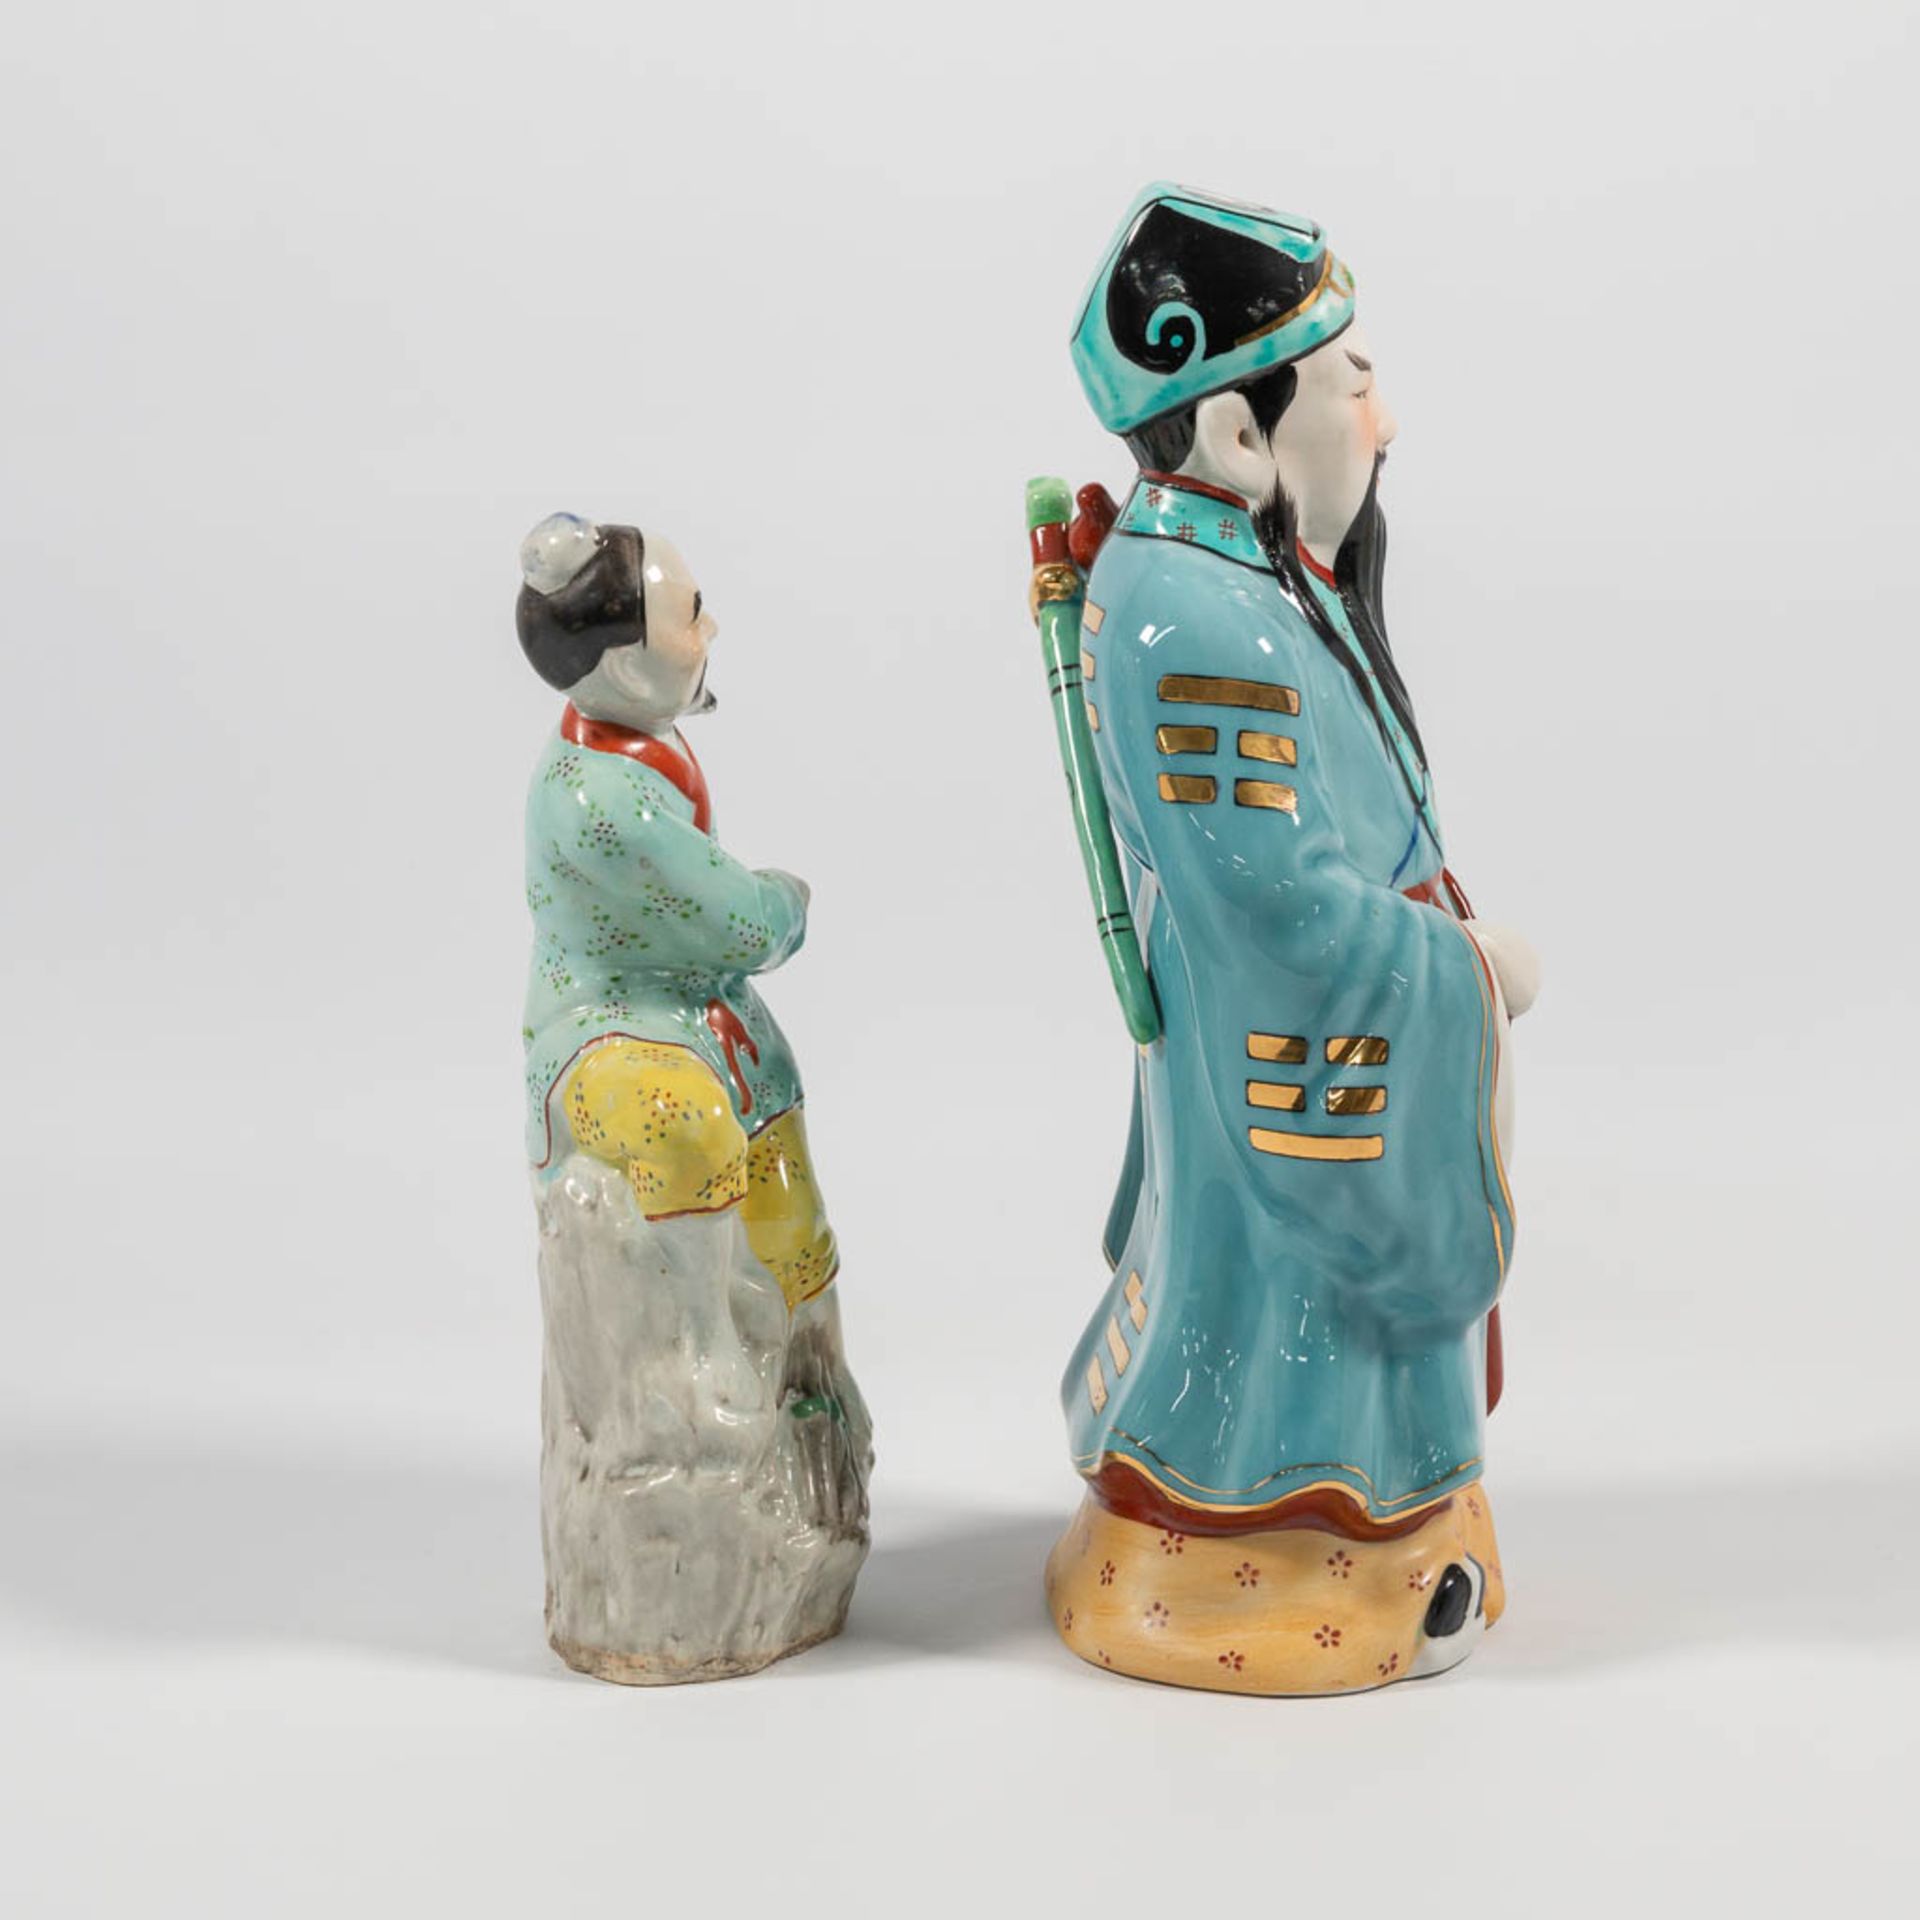 A Collection of 4 Chinese immortal figurines, made of porcelain. - Image 2 of 25